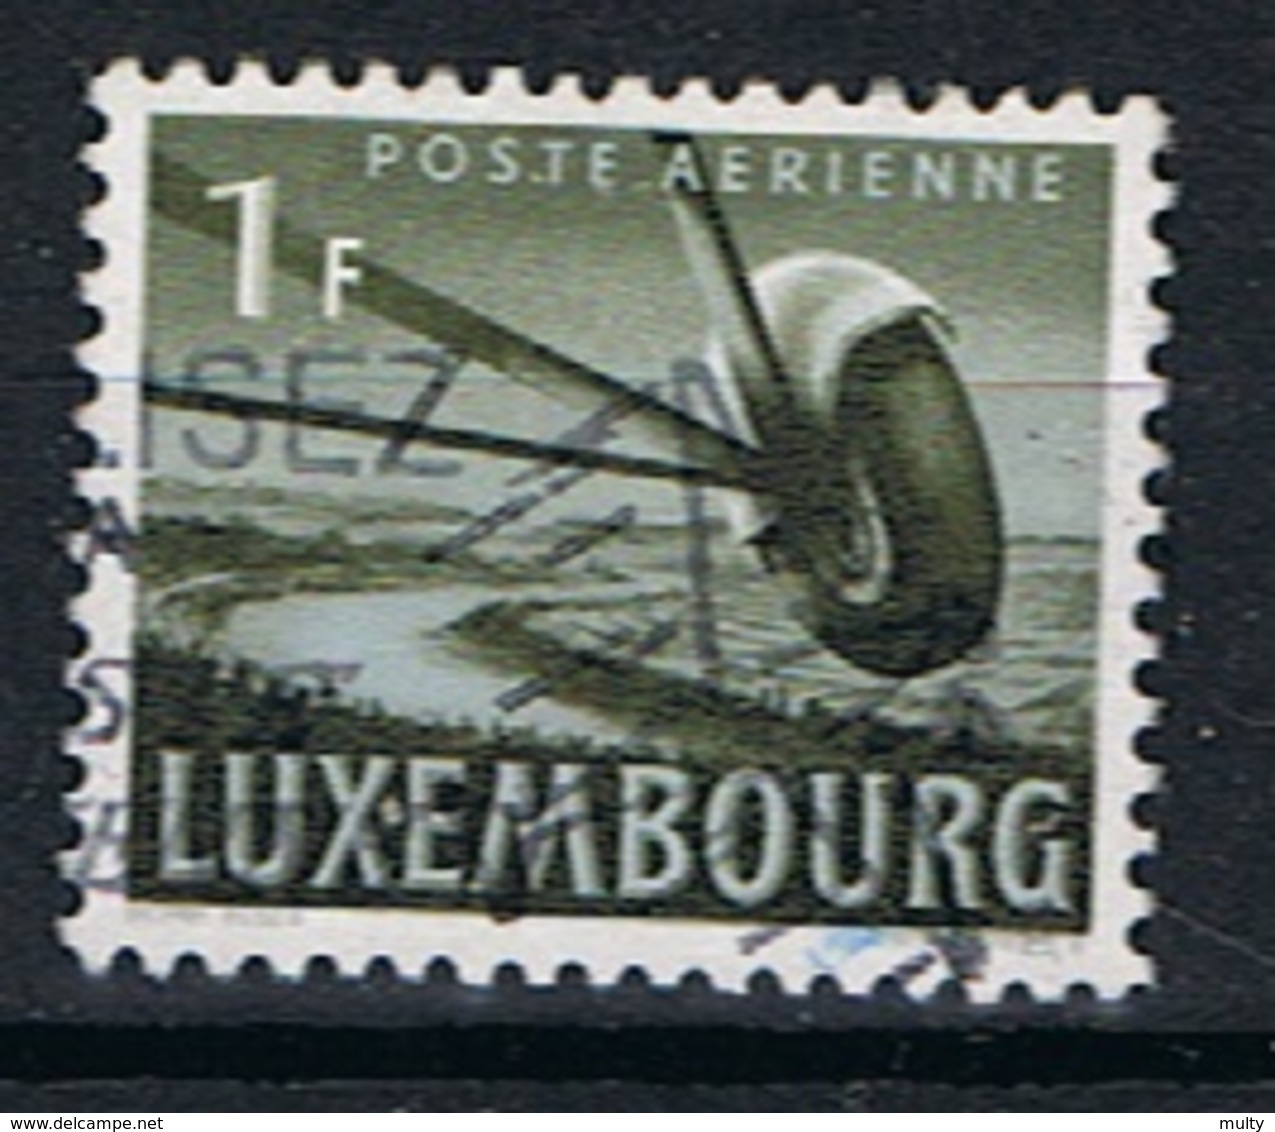 Luxemburg Y/T LP 7 (0) - Used Stamps